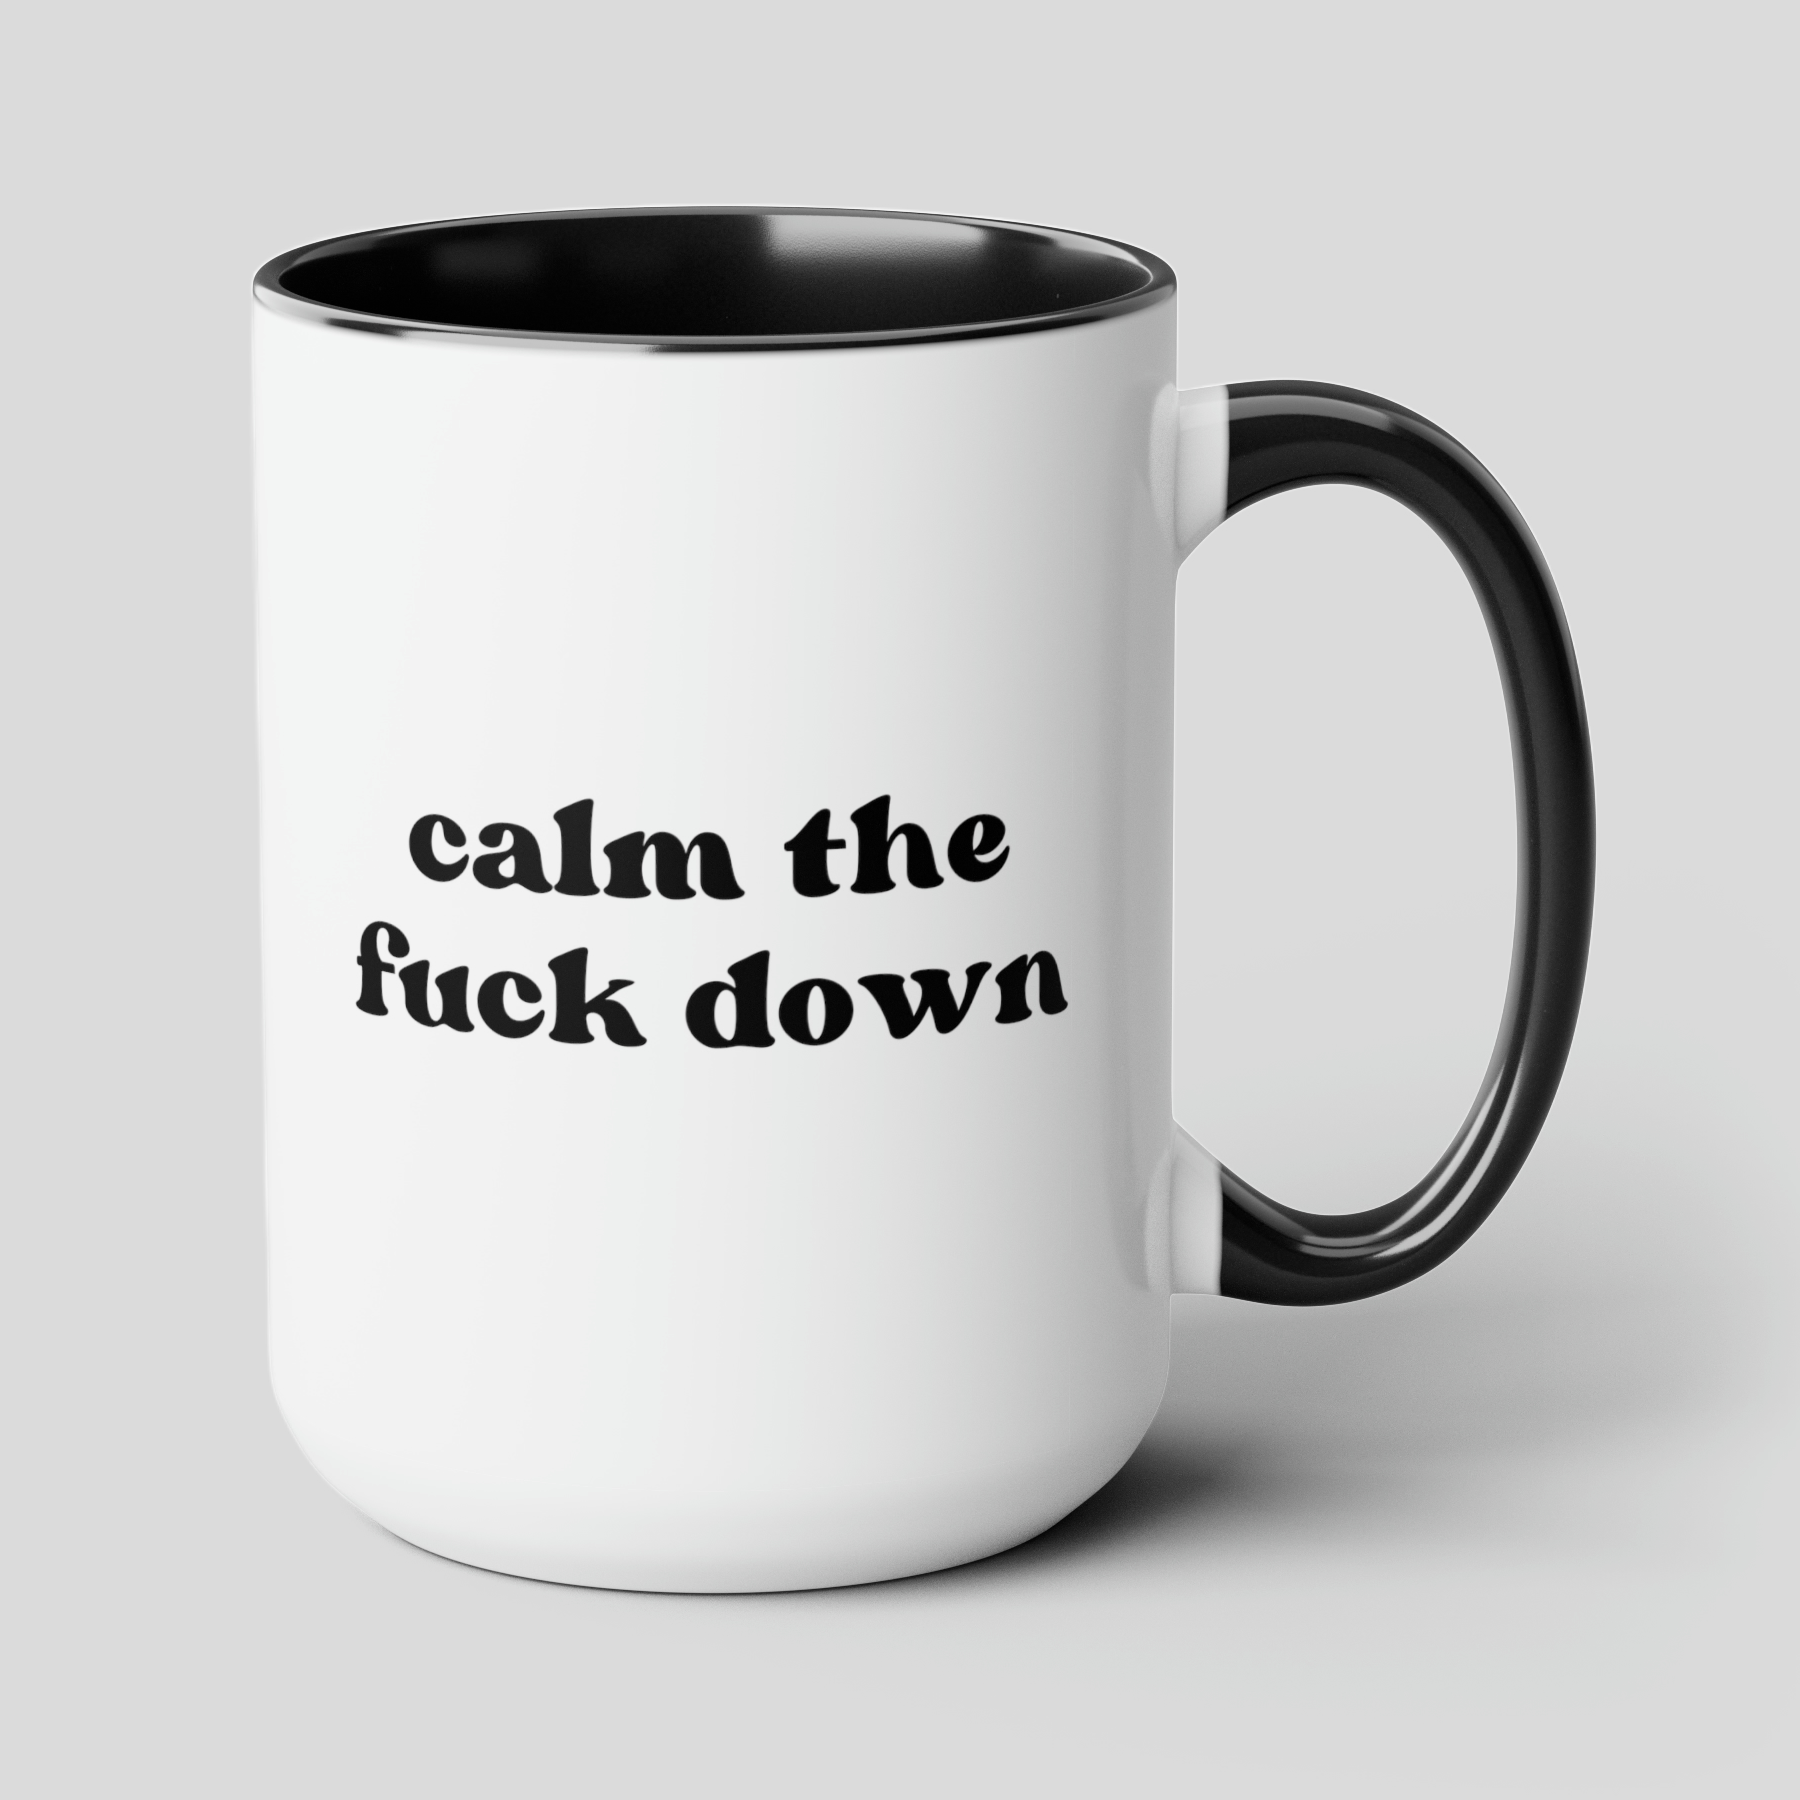 Calm The Fuck Down 15oz white with black accent funny large coffee mug gift for him her friend relax anxiety stress reliever mental health rude curse waveywares wavey wares wavywares wavy wares cover